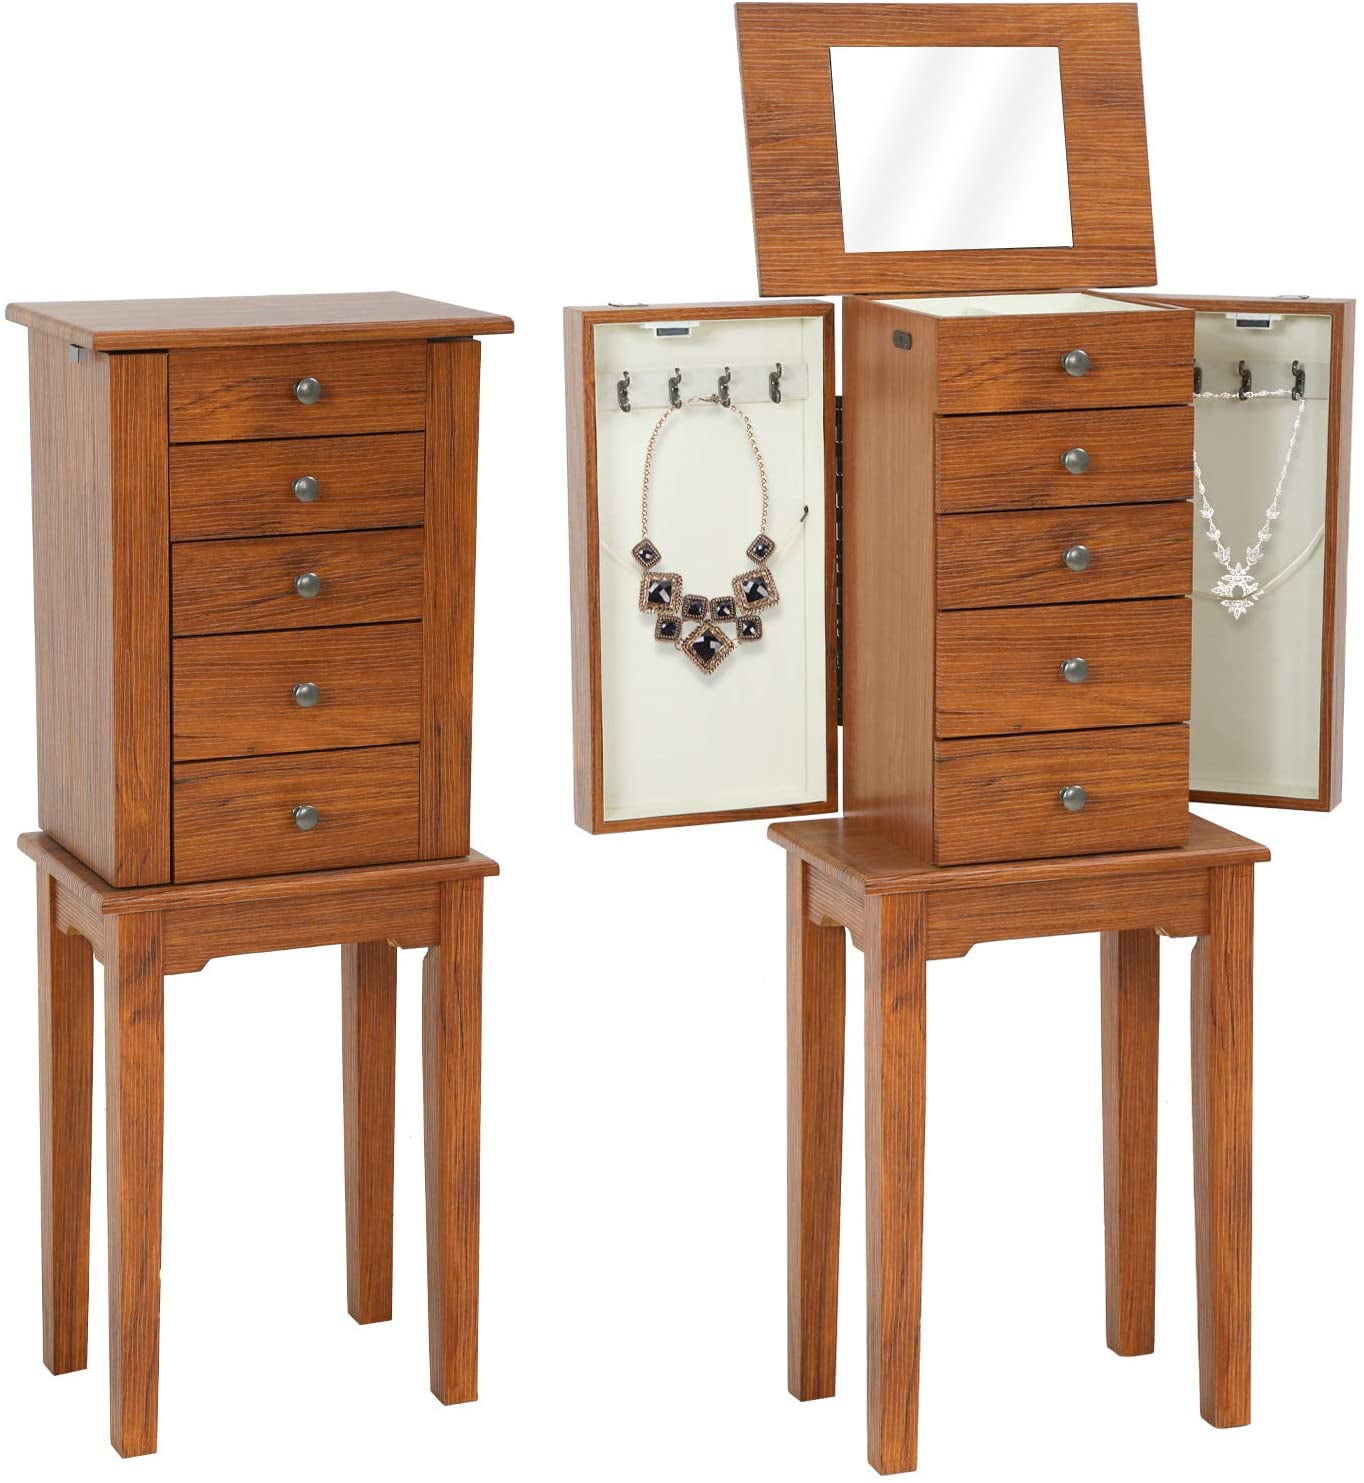 Standing Jewelry Cabinet Armoire 5 Drawers 2 Side Doors and 8 Necklace